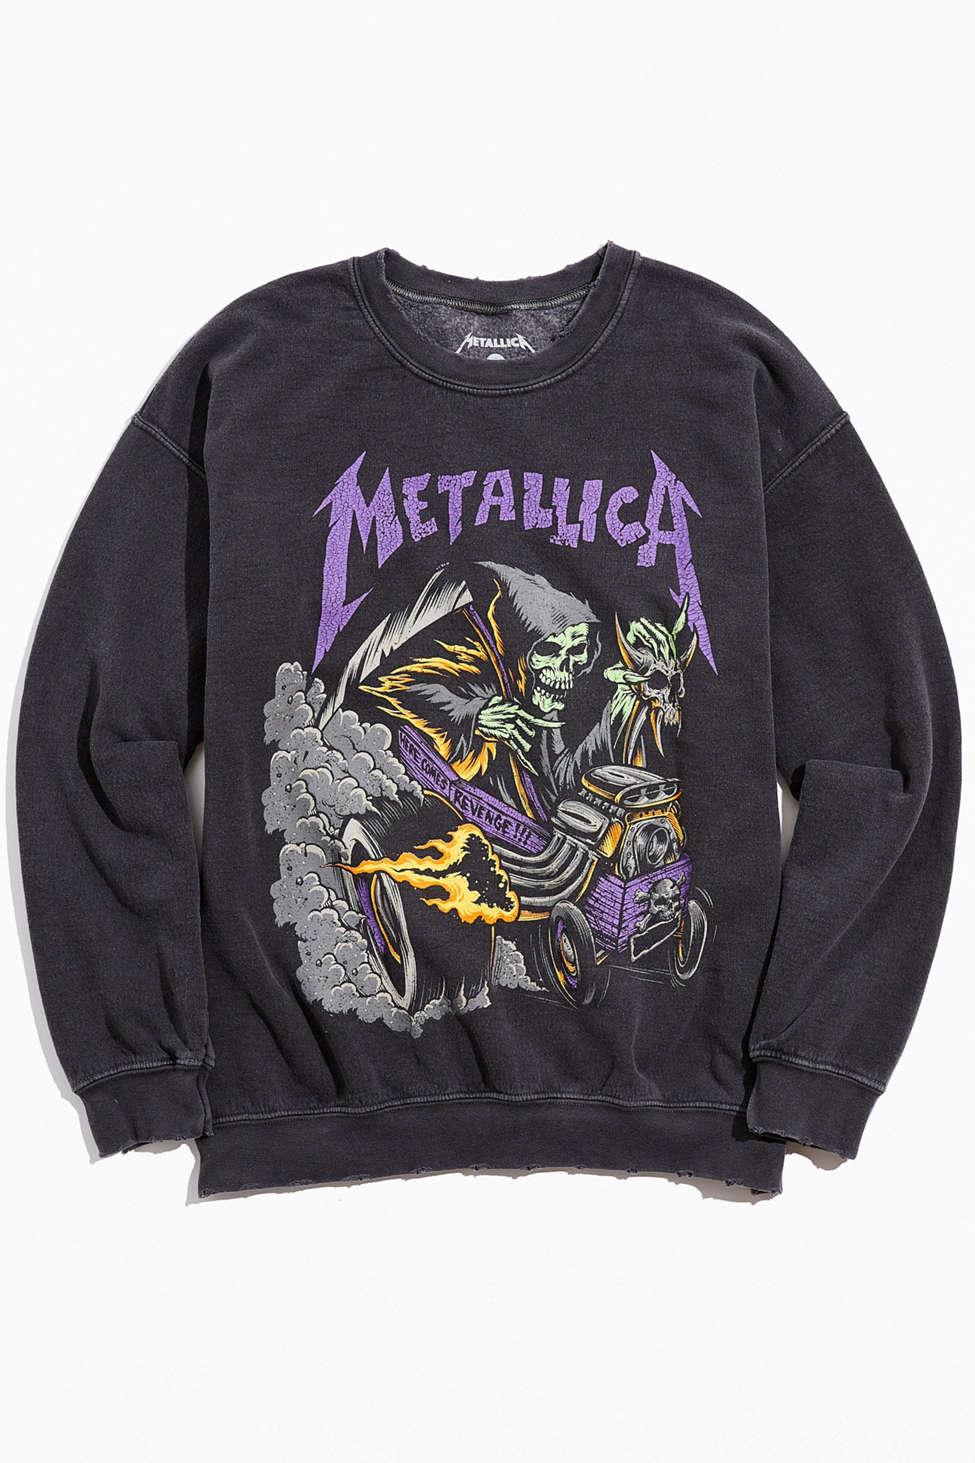 Urban Outfitters Cotton Metallica Distressed Washed Crew Neck Sweatshirt in  Black for Men - Lyst